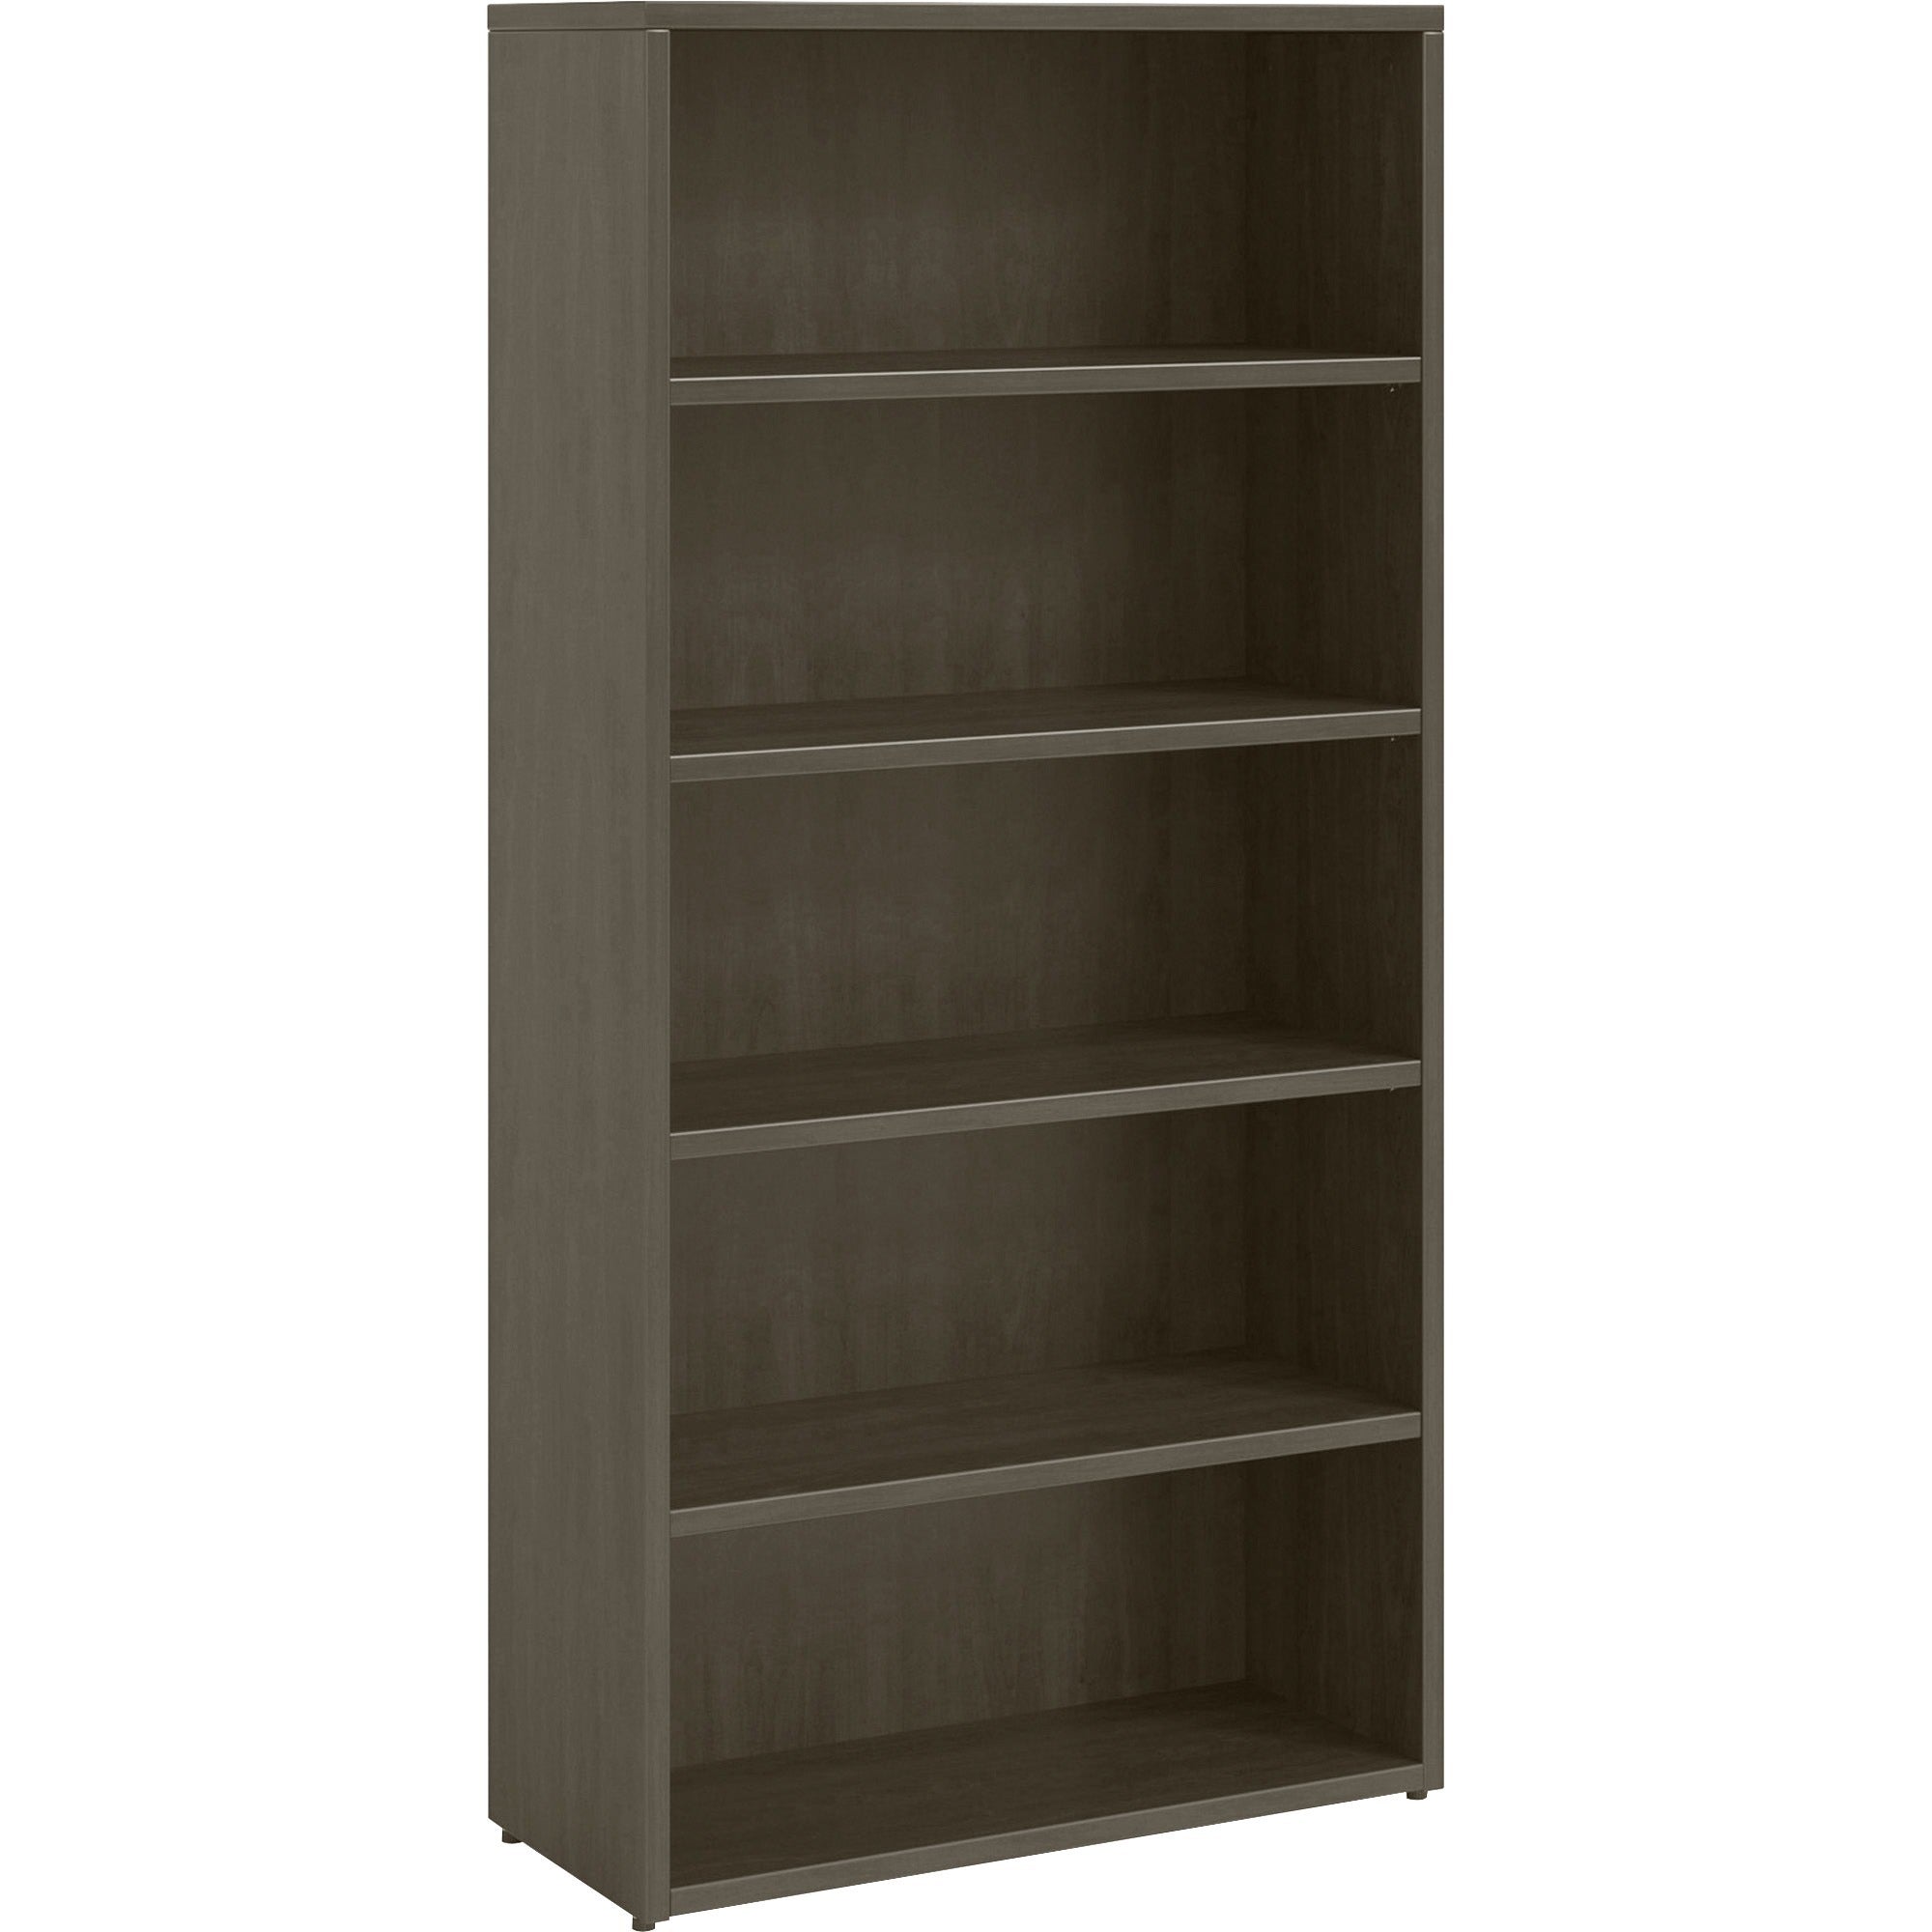 lorell-prominence-20-bookcase-34-x-1269--1-top-01-edge-5-shelves-4-adjustable-shelfves-material-particleboard-finish-gray-elm_llrpbk3469ge - 1